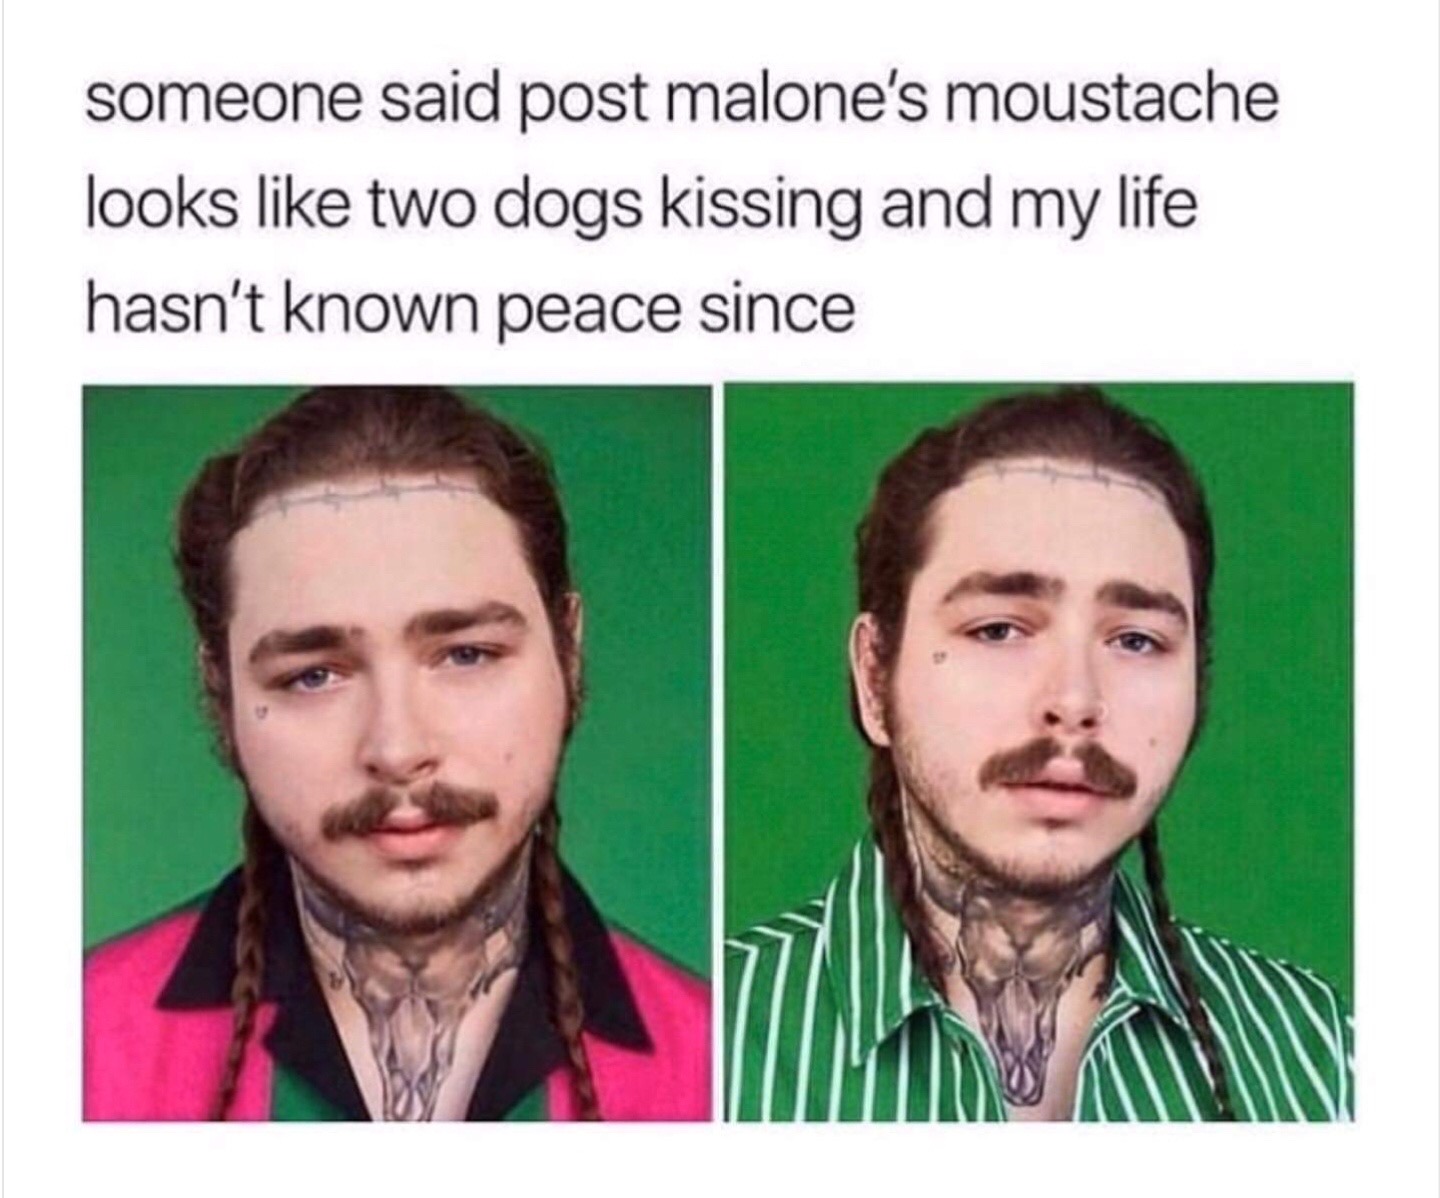 funny memes to post - someone said post malone's moustache looks two dogs kissing and my life hasn't known peace since